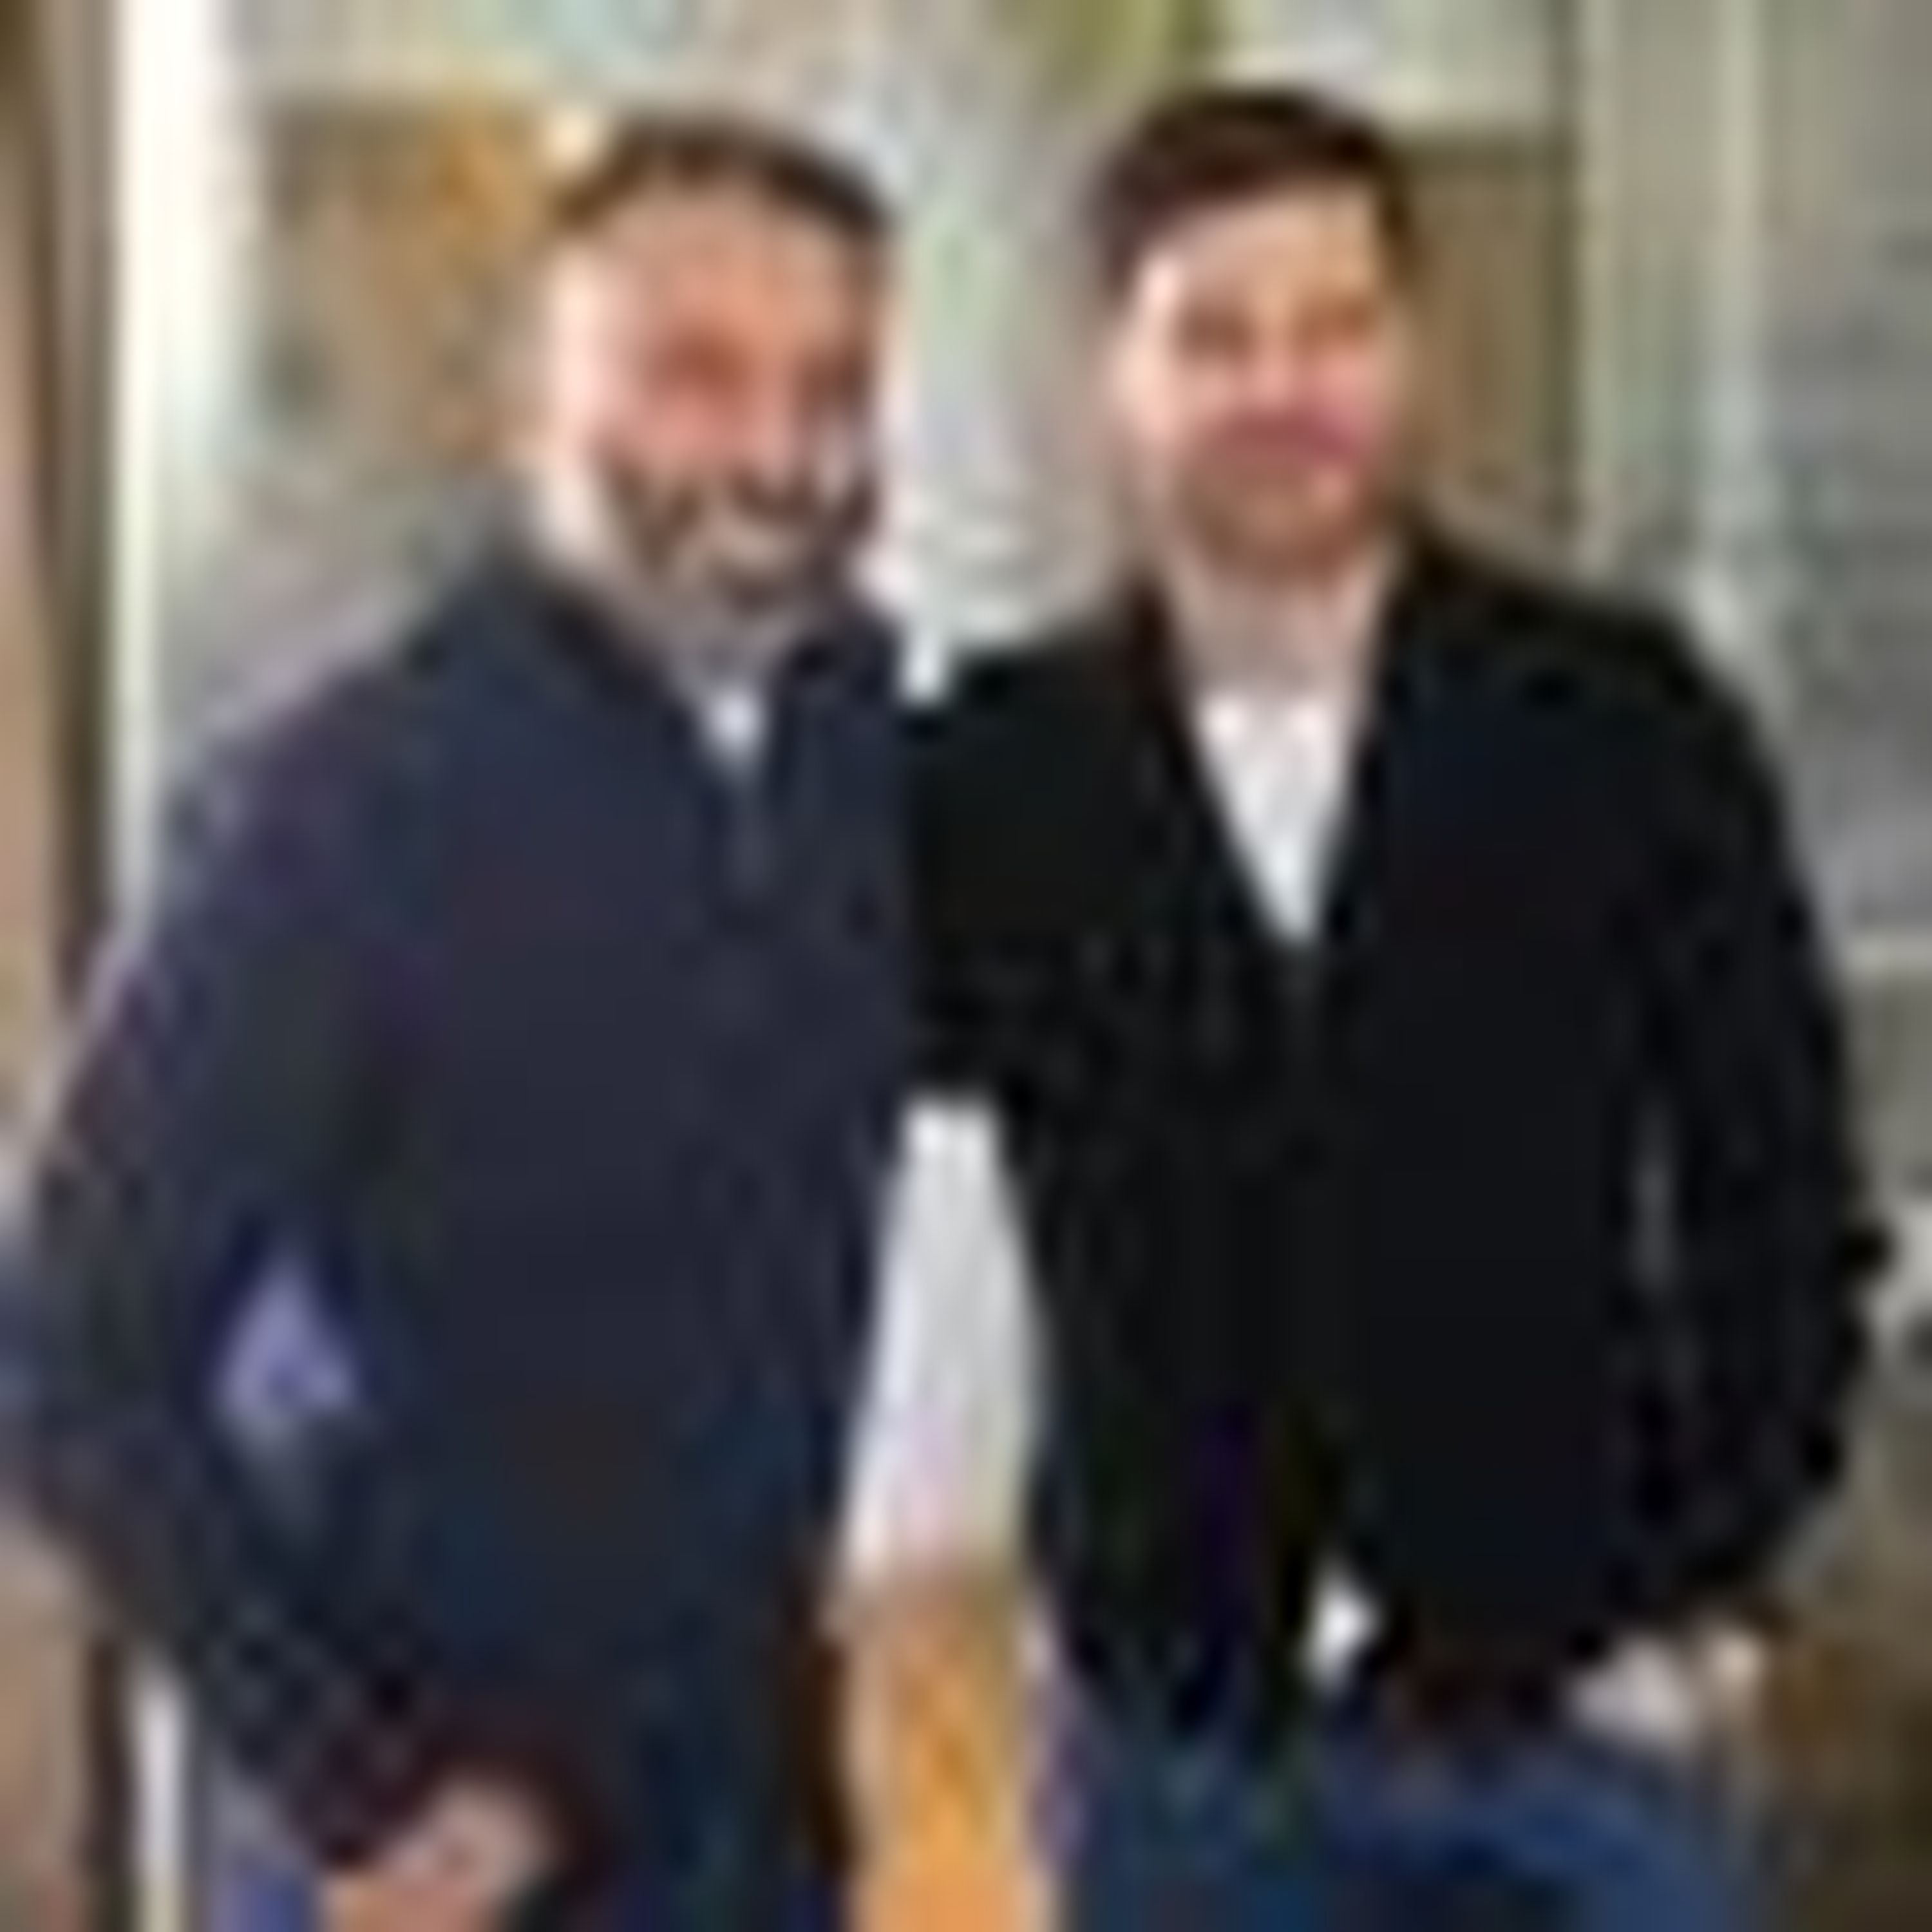 Inside Football with Guillem Balague: In conversation with former Liverpool and Real Madrid star Xabi Alonso